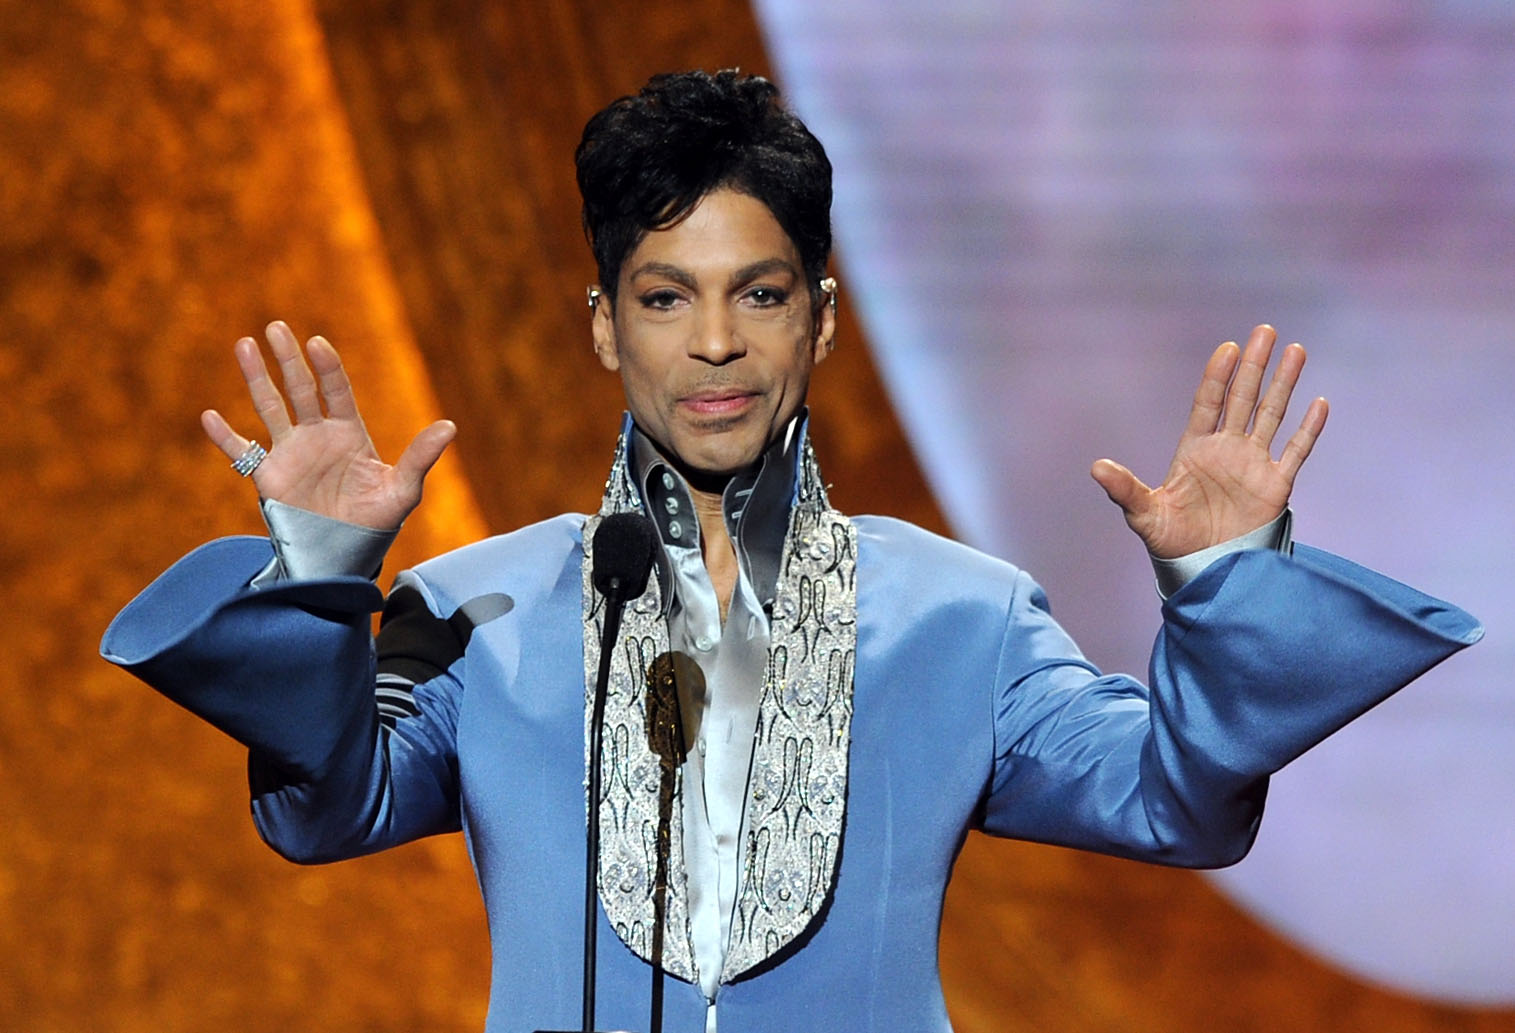 Prince at the 42nd NAACP Image Awards in Los Angeles, California on March 4, 2011 | Source: Getty Images